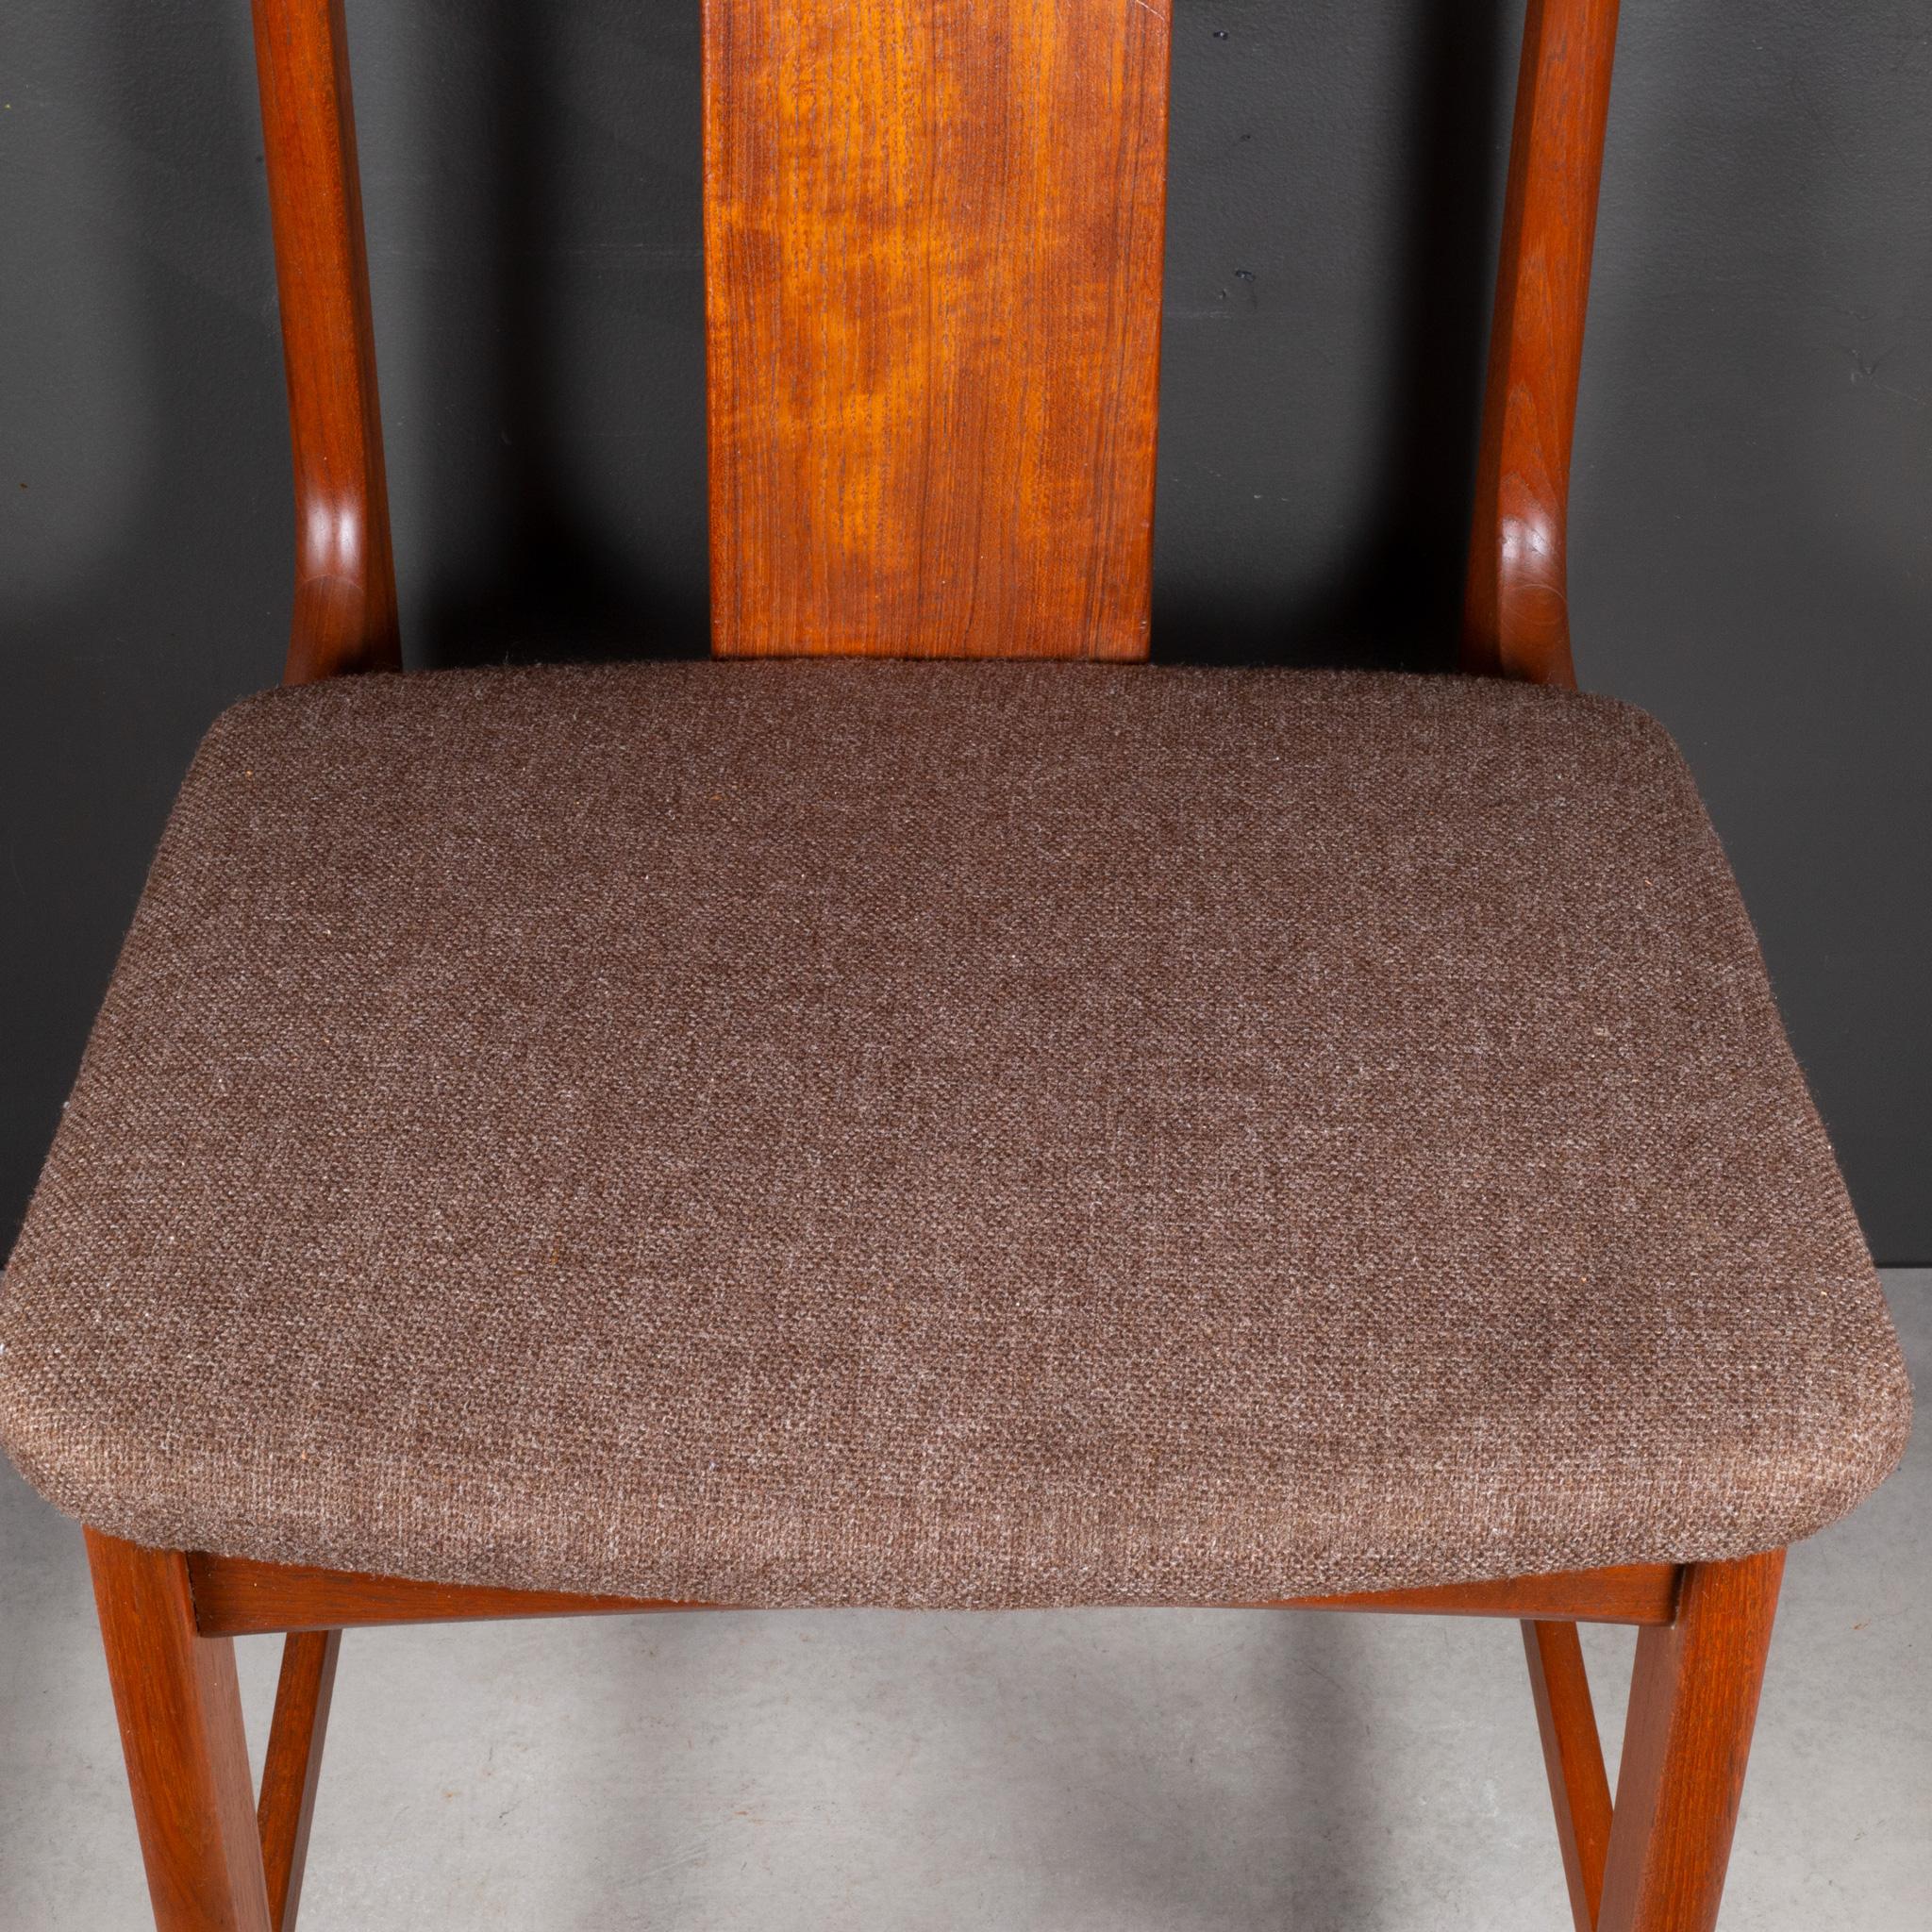 Midcentury Japanese Sculpted Teak Dining Chairs C.1960 For Sale 7